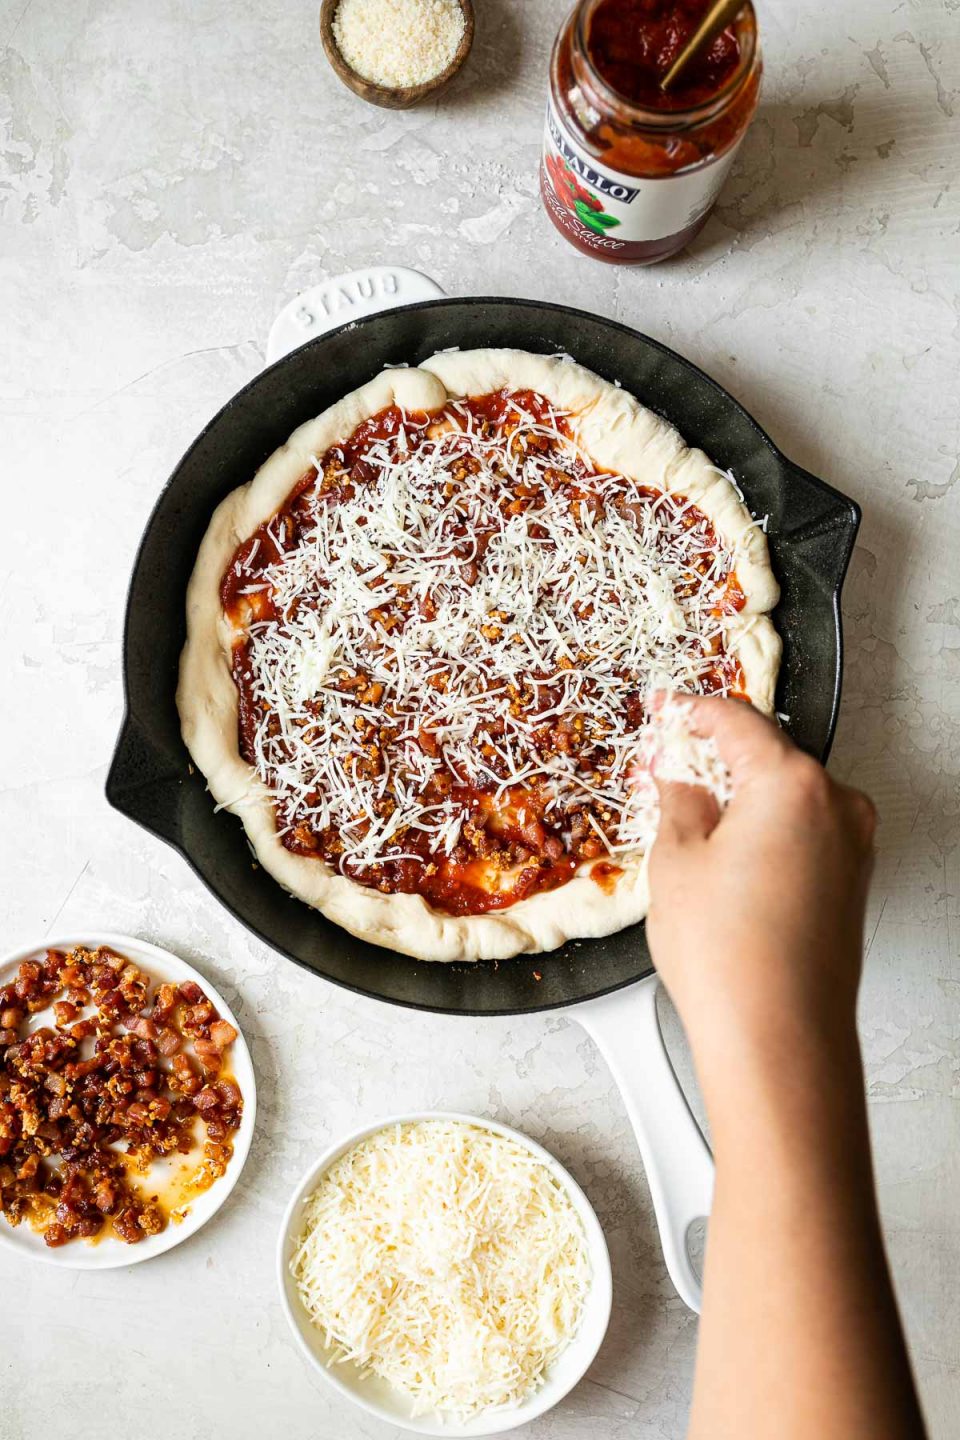 A woman's hand reaching into the frame sprinkling shredded cheese over pizza crust formed in a white Staub cast iron skillet. The skillet sits on a white surface, surrounded by parmesan cheese, a jar of DeLallo pizza sauce, fried pancetta & garlic, & shredded Italian cheese.